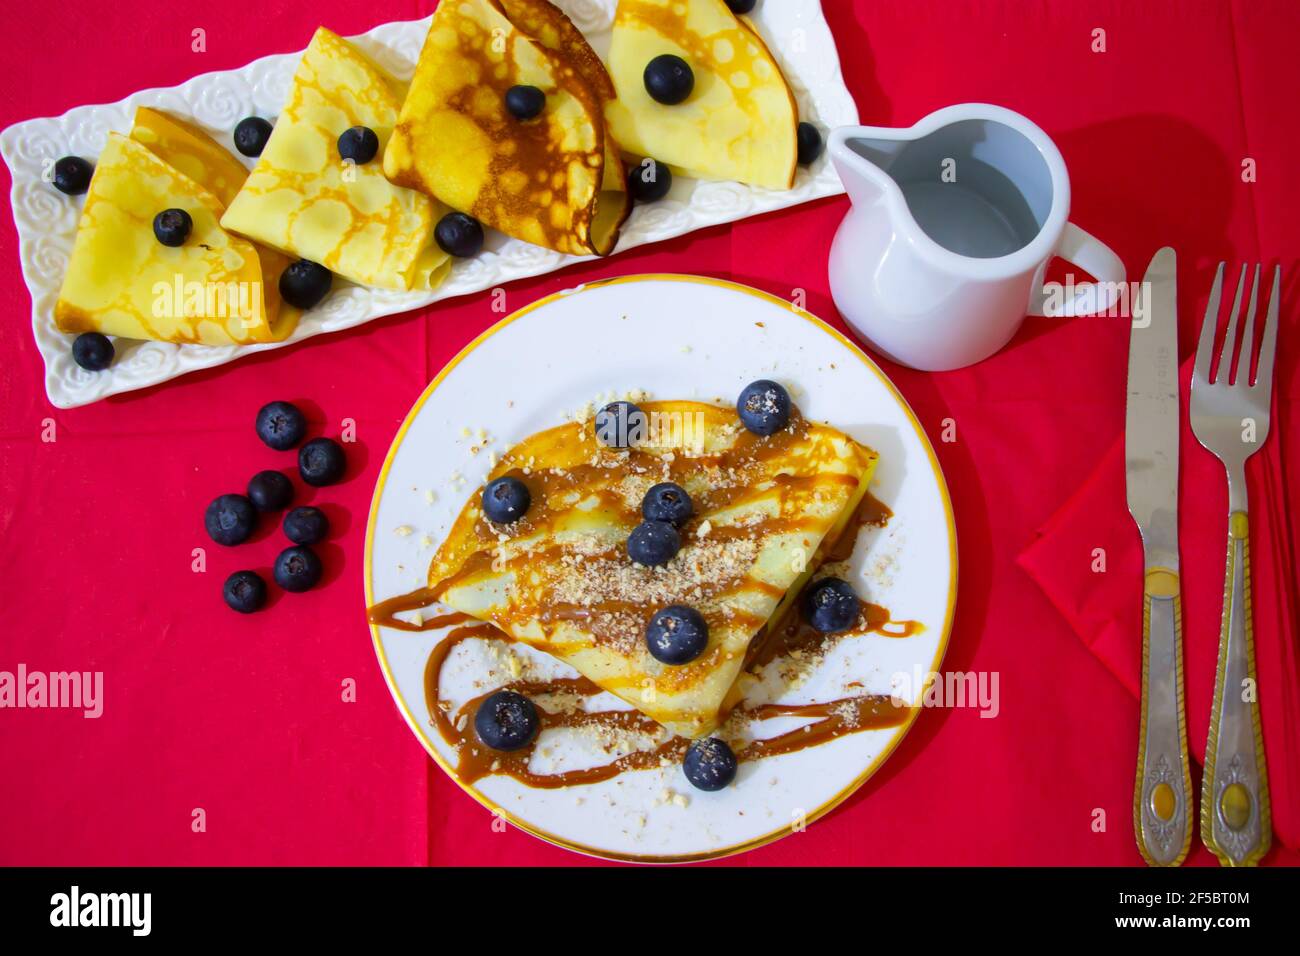 caramel, almond and blueberry crepes Stock Photo